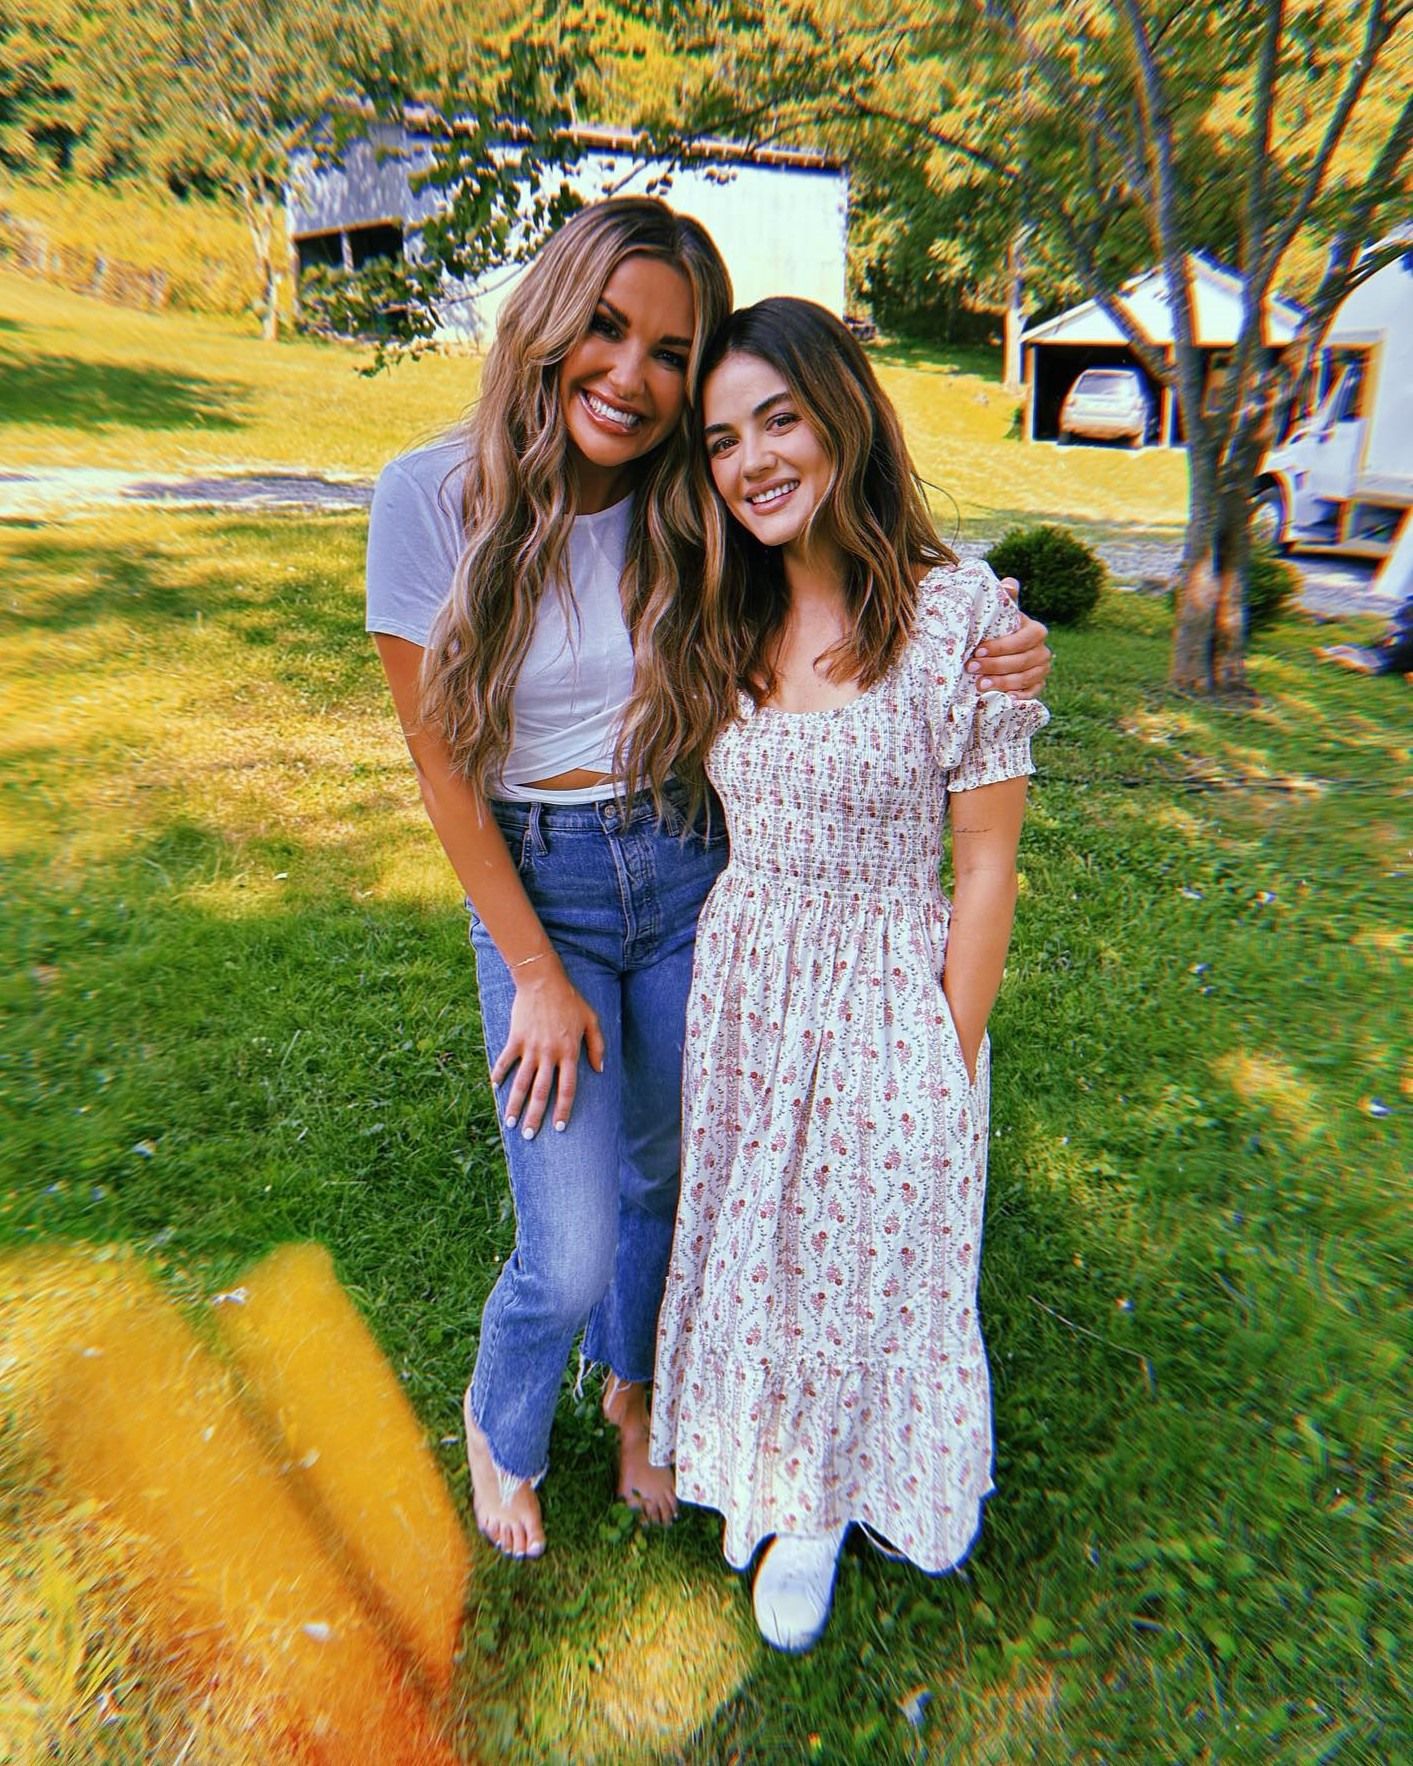 Lucy Hale - Instagram post | Carly Pearce | Hilary Duff style